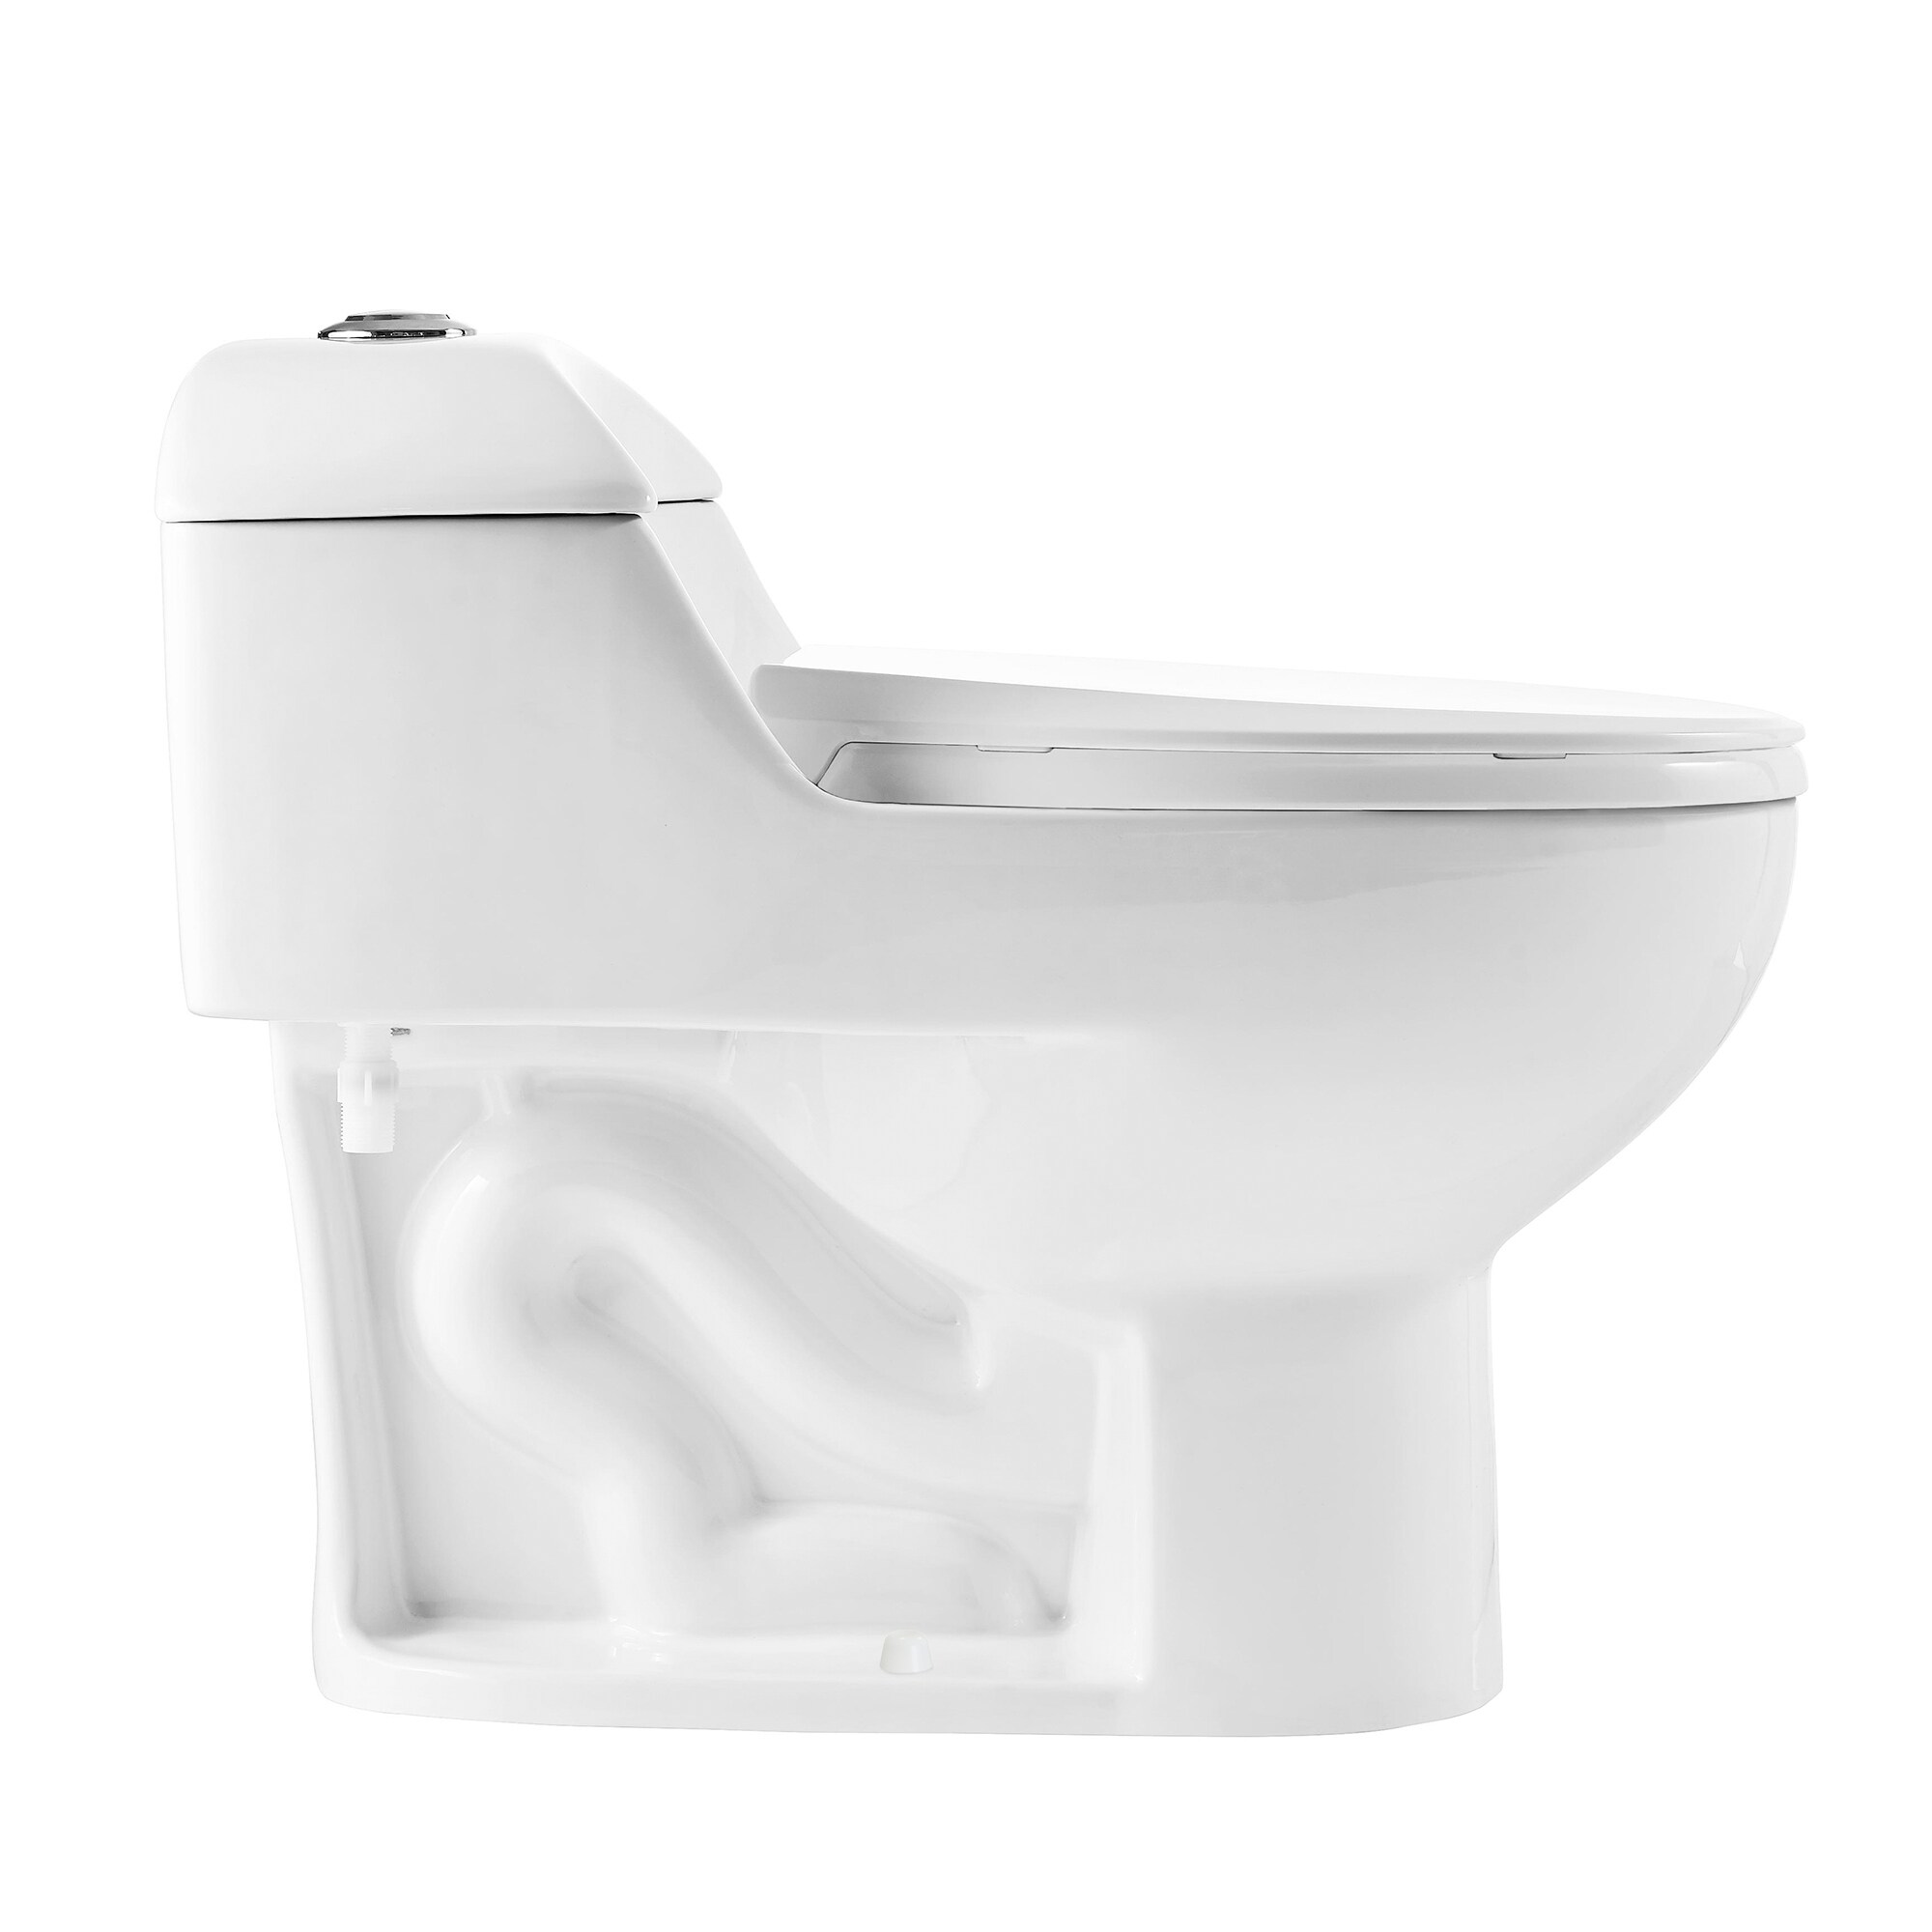 Aoibox 1-Piece 1.1/1.6 GPF Elongated Dual Flush Water saving Toilet in.  White, Seat Included SNMX410 - The Home Depot